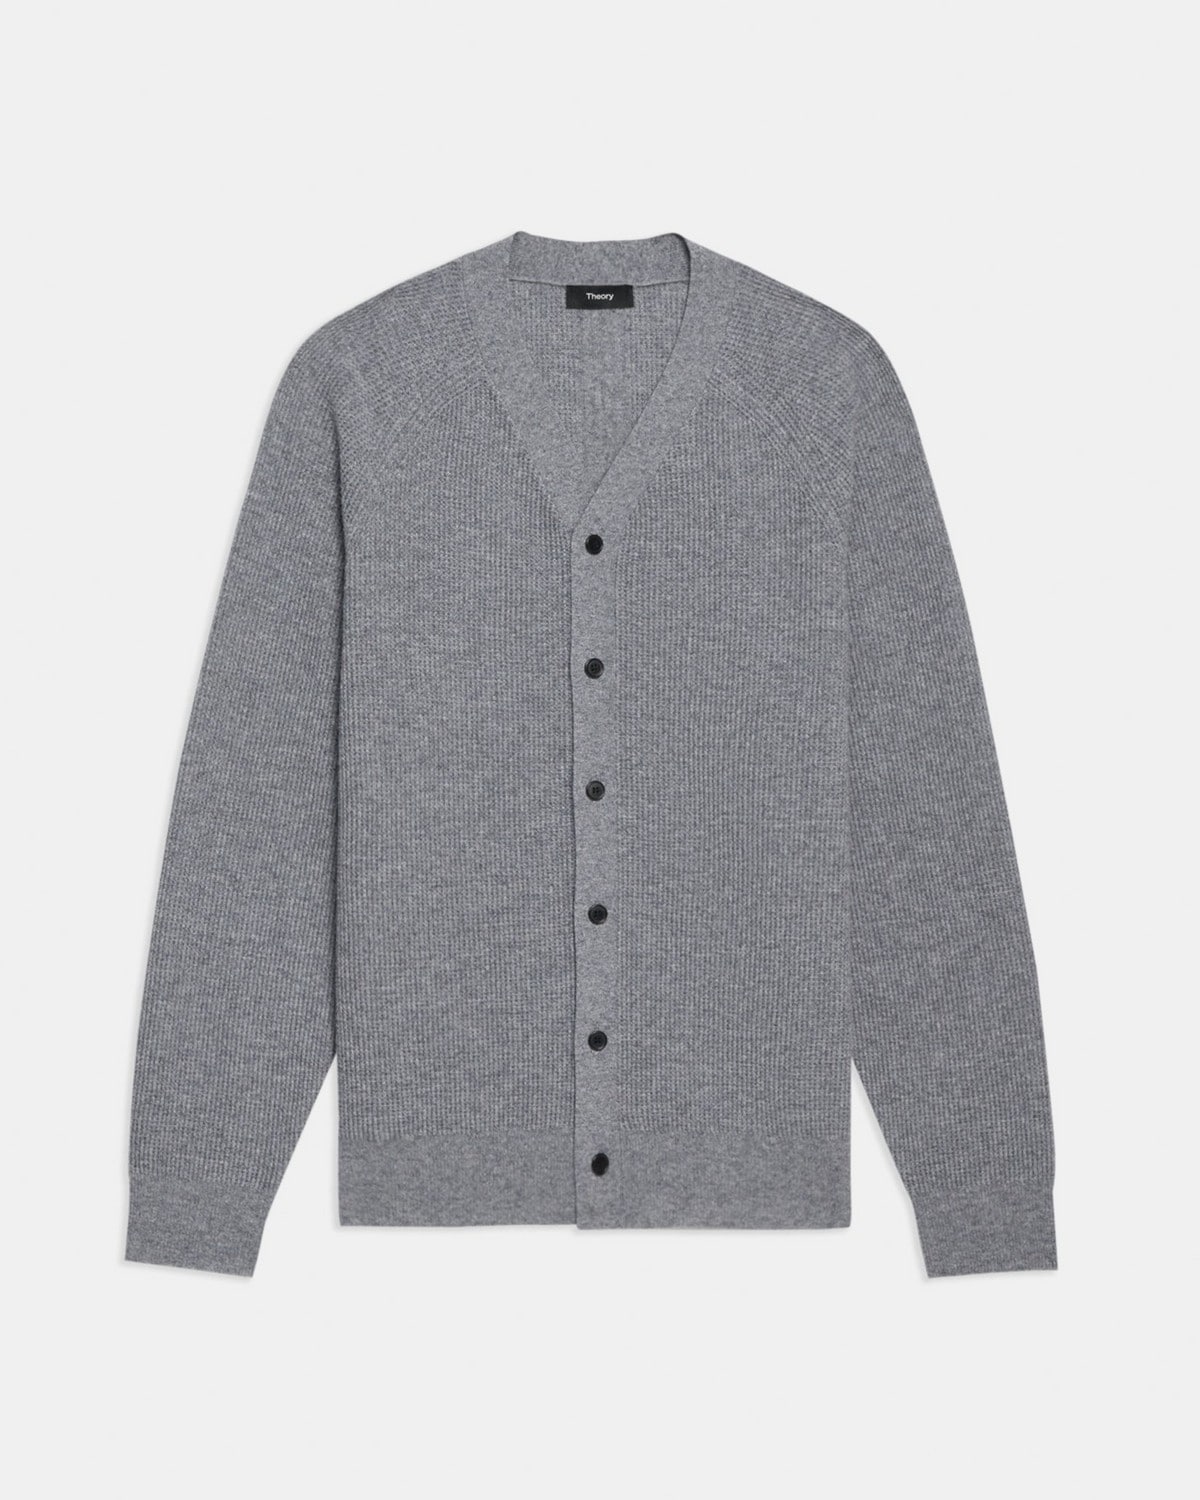 Toby Cardigan in Wool-Cashmere